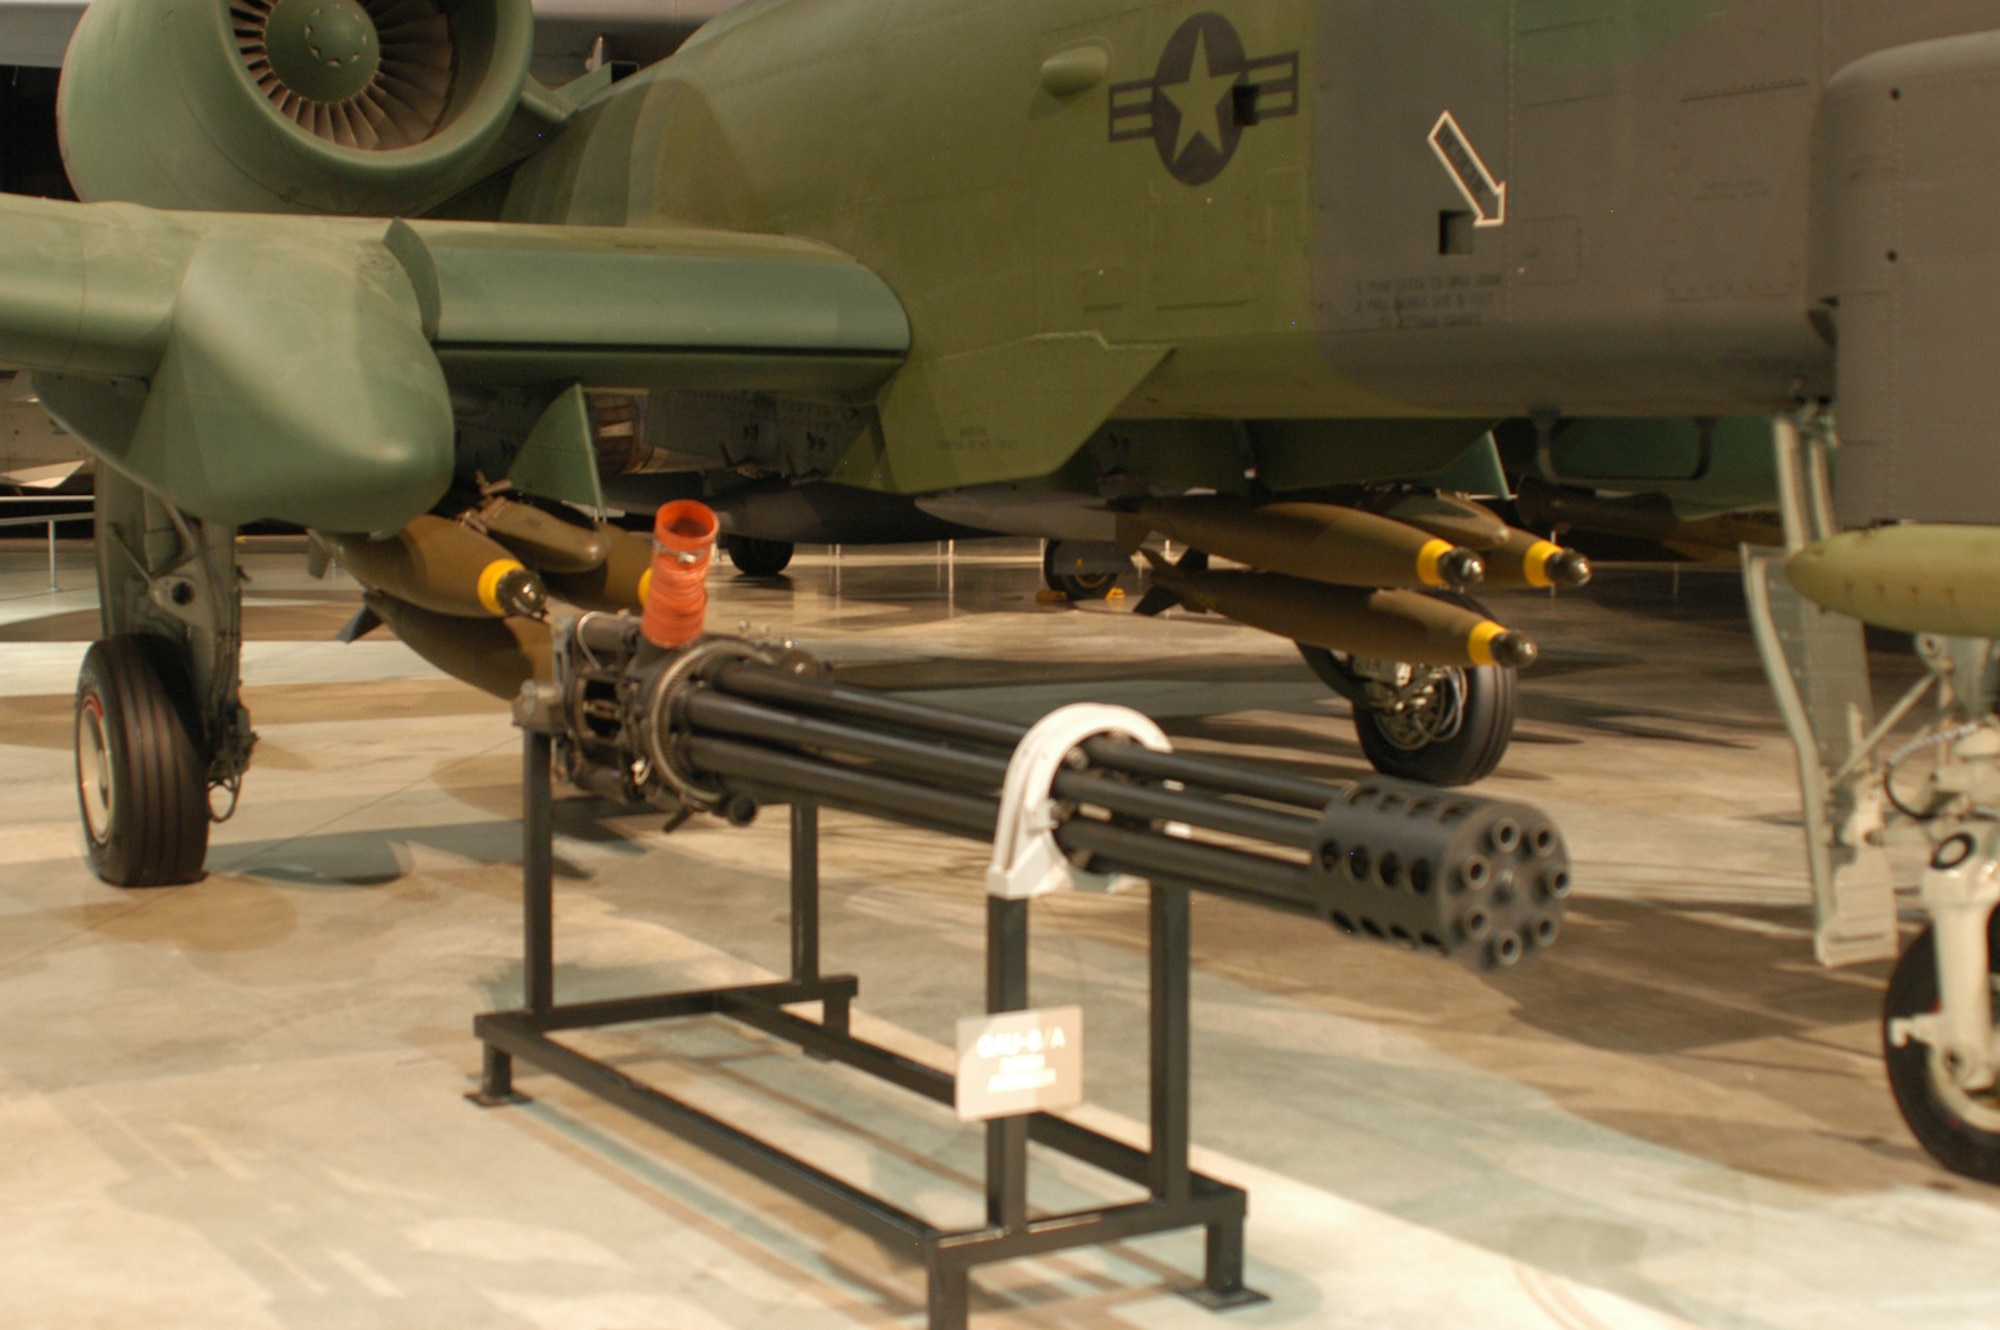 DAYTON, Ohio -- GAU-8/A Avenger on display at the National Museum of the U.S. Air Force. (U.S. Air Force photo)